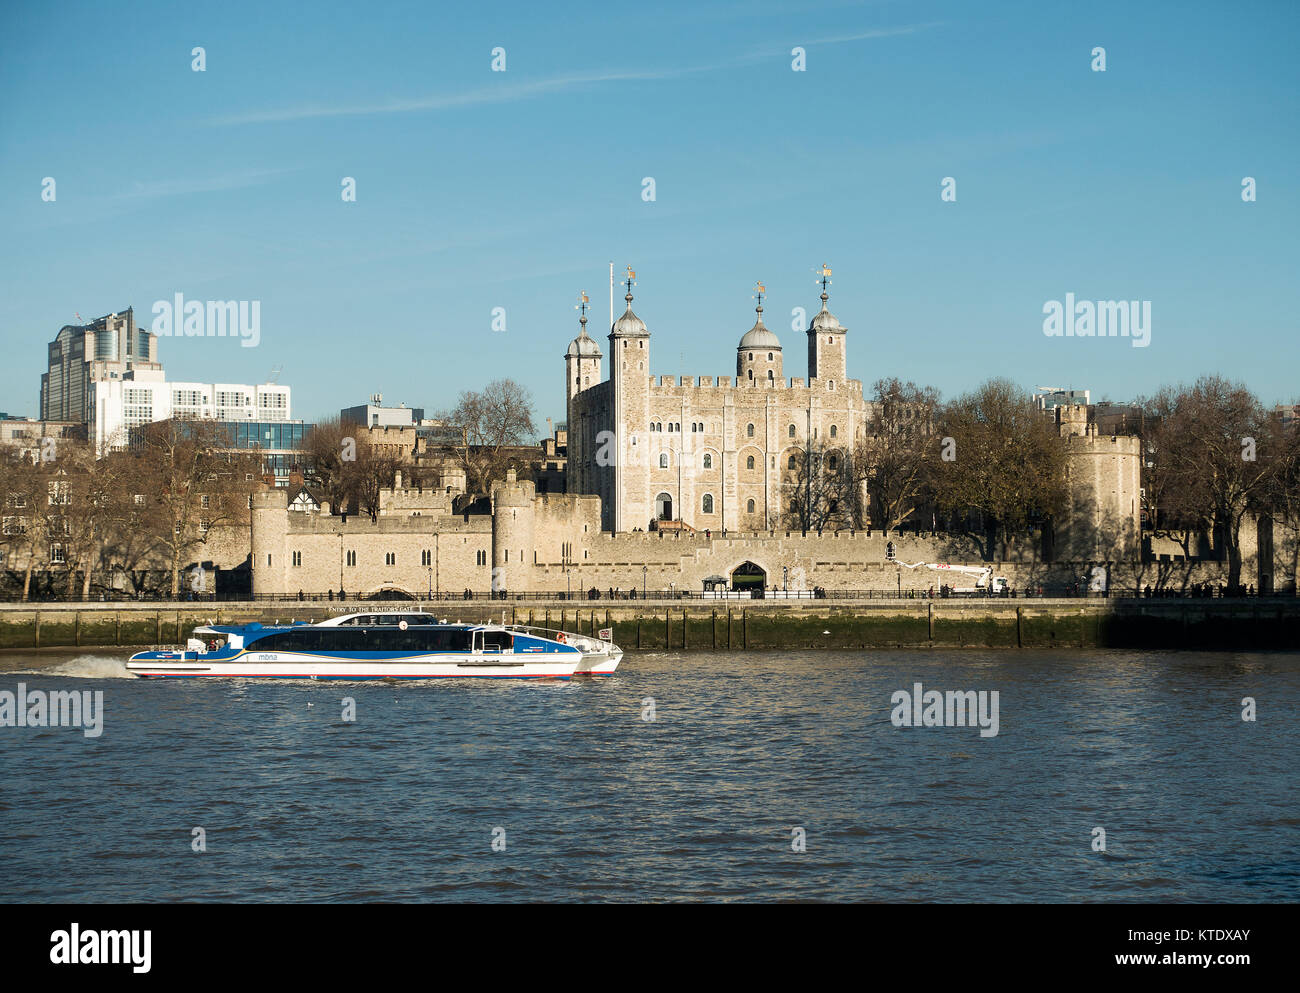 The Tower of London with Tourist Cruise Boat on River Thame North Bank London England United Kingdom UK Stock Photo